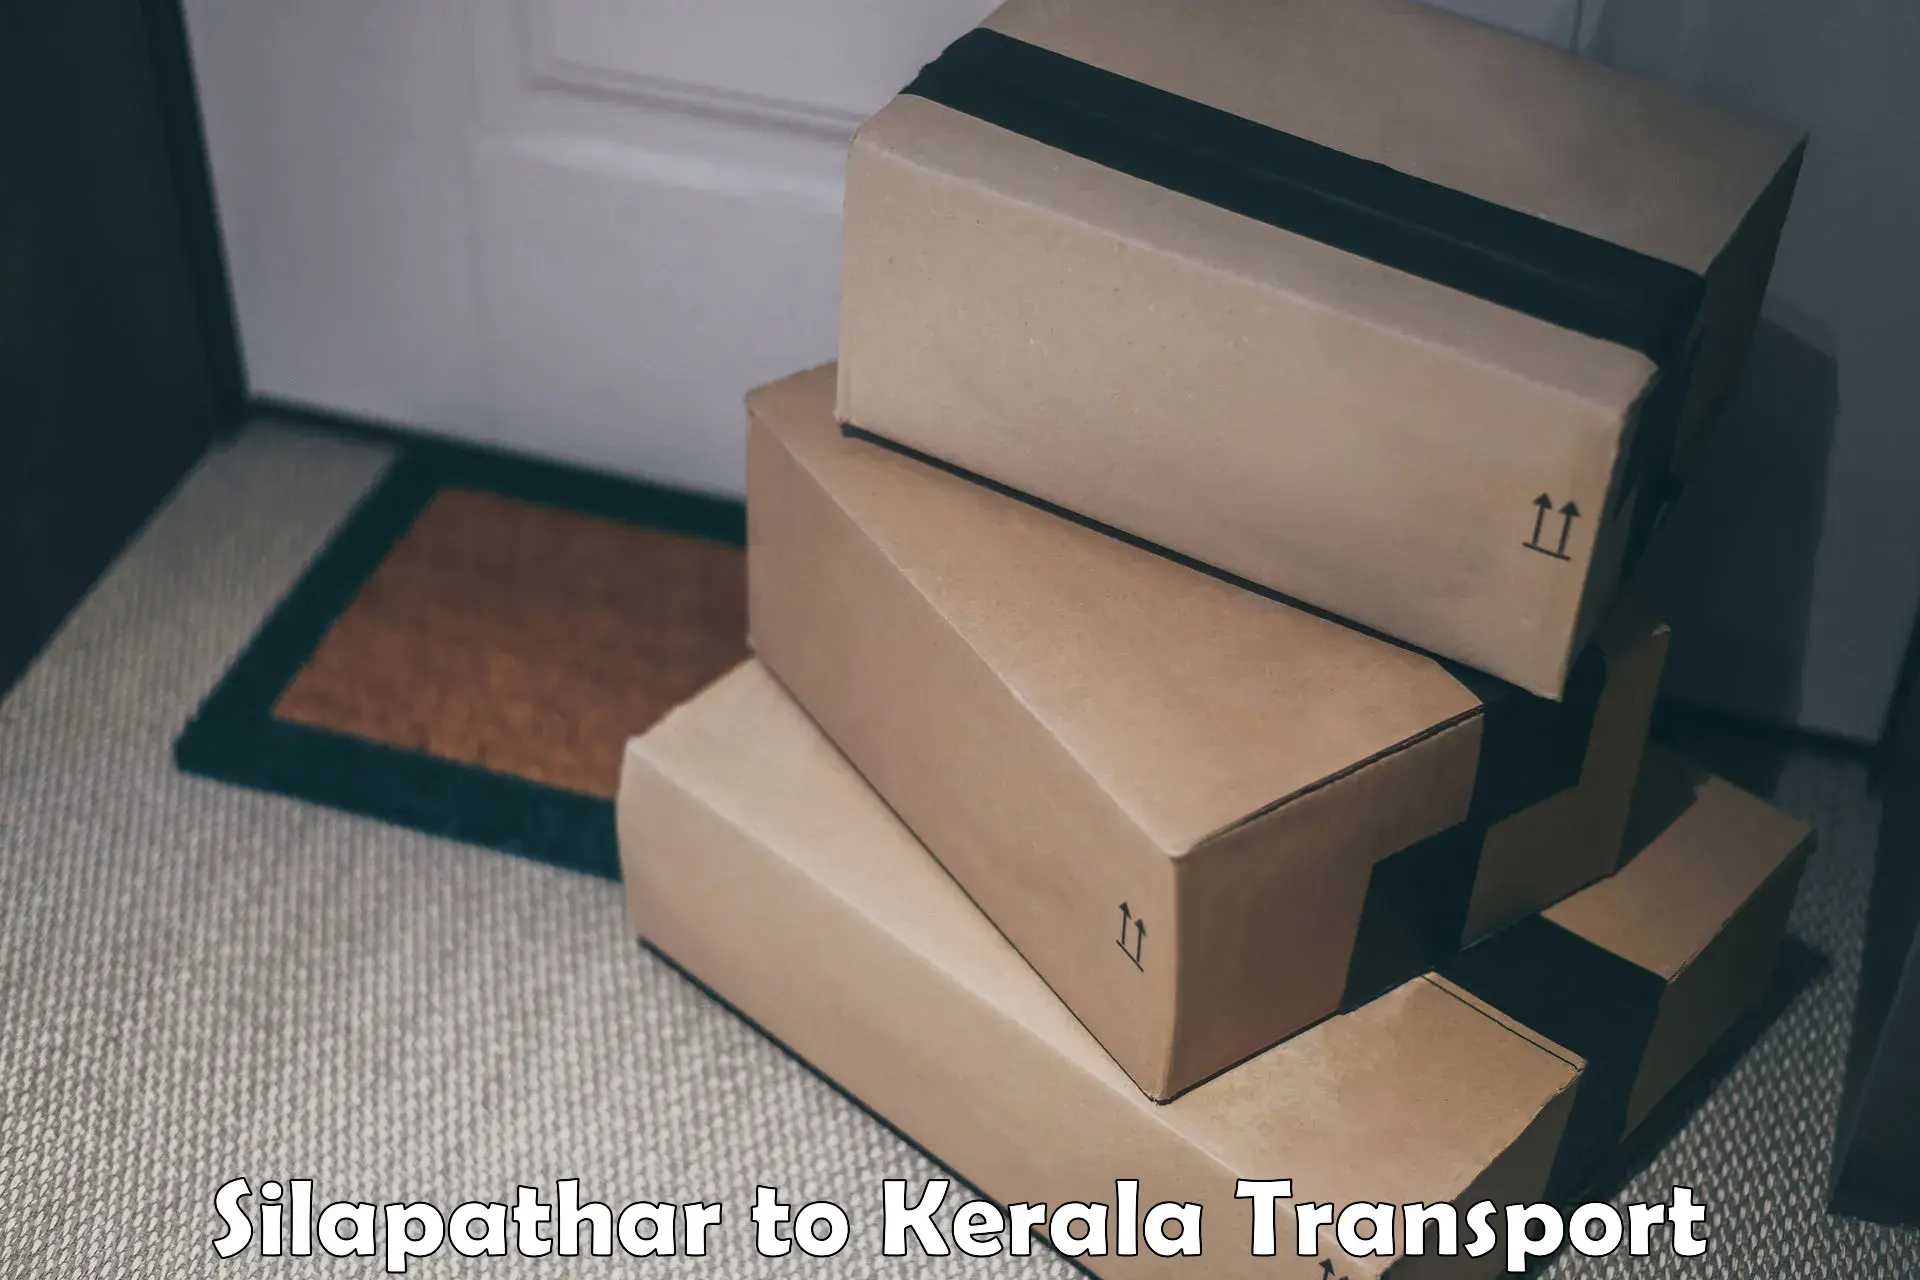 Goods delivery service Silapathar to Kozhencherry